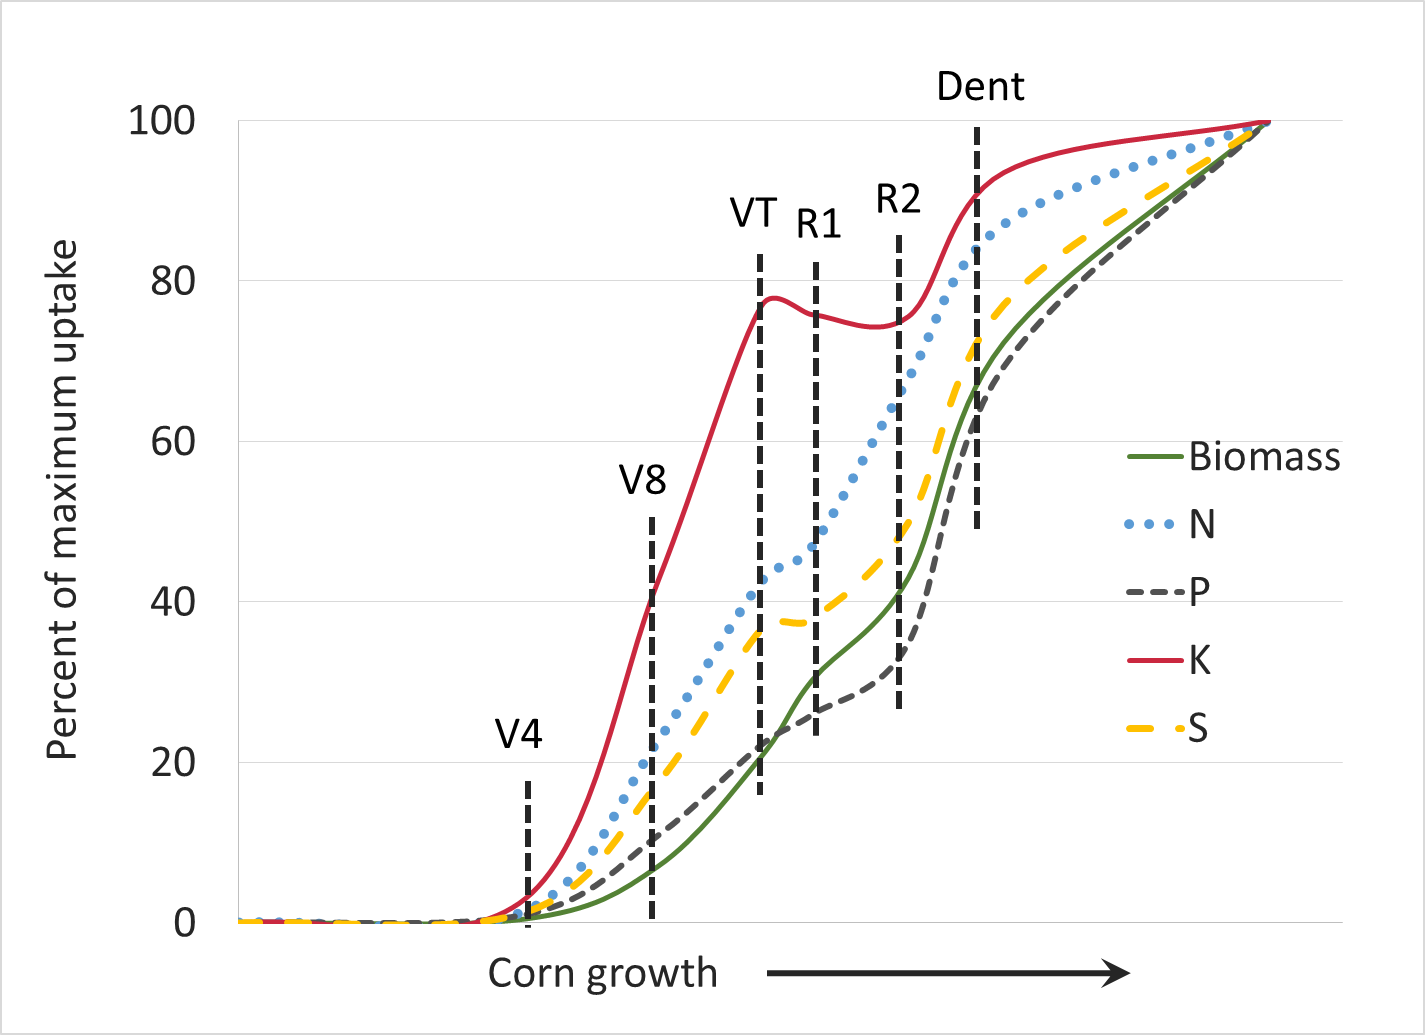 Corn: Uptake increases dramatically at V4, with K uptake the highest. Rates remain fairly constant until corn reaches maturity.